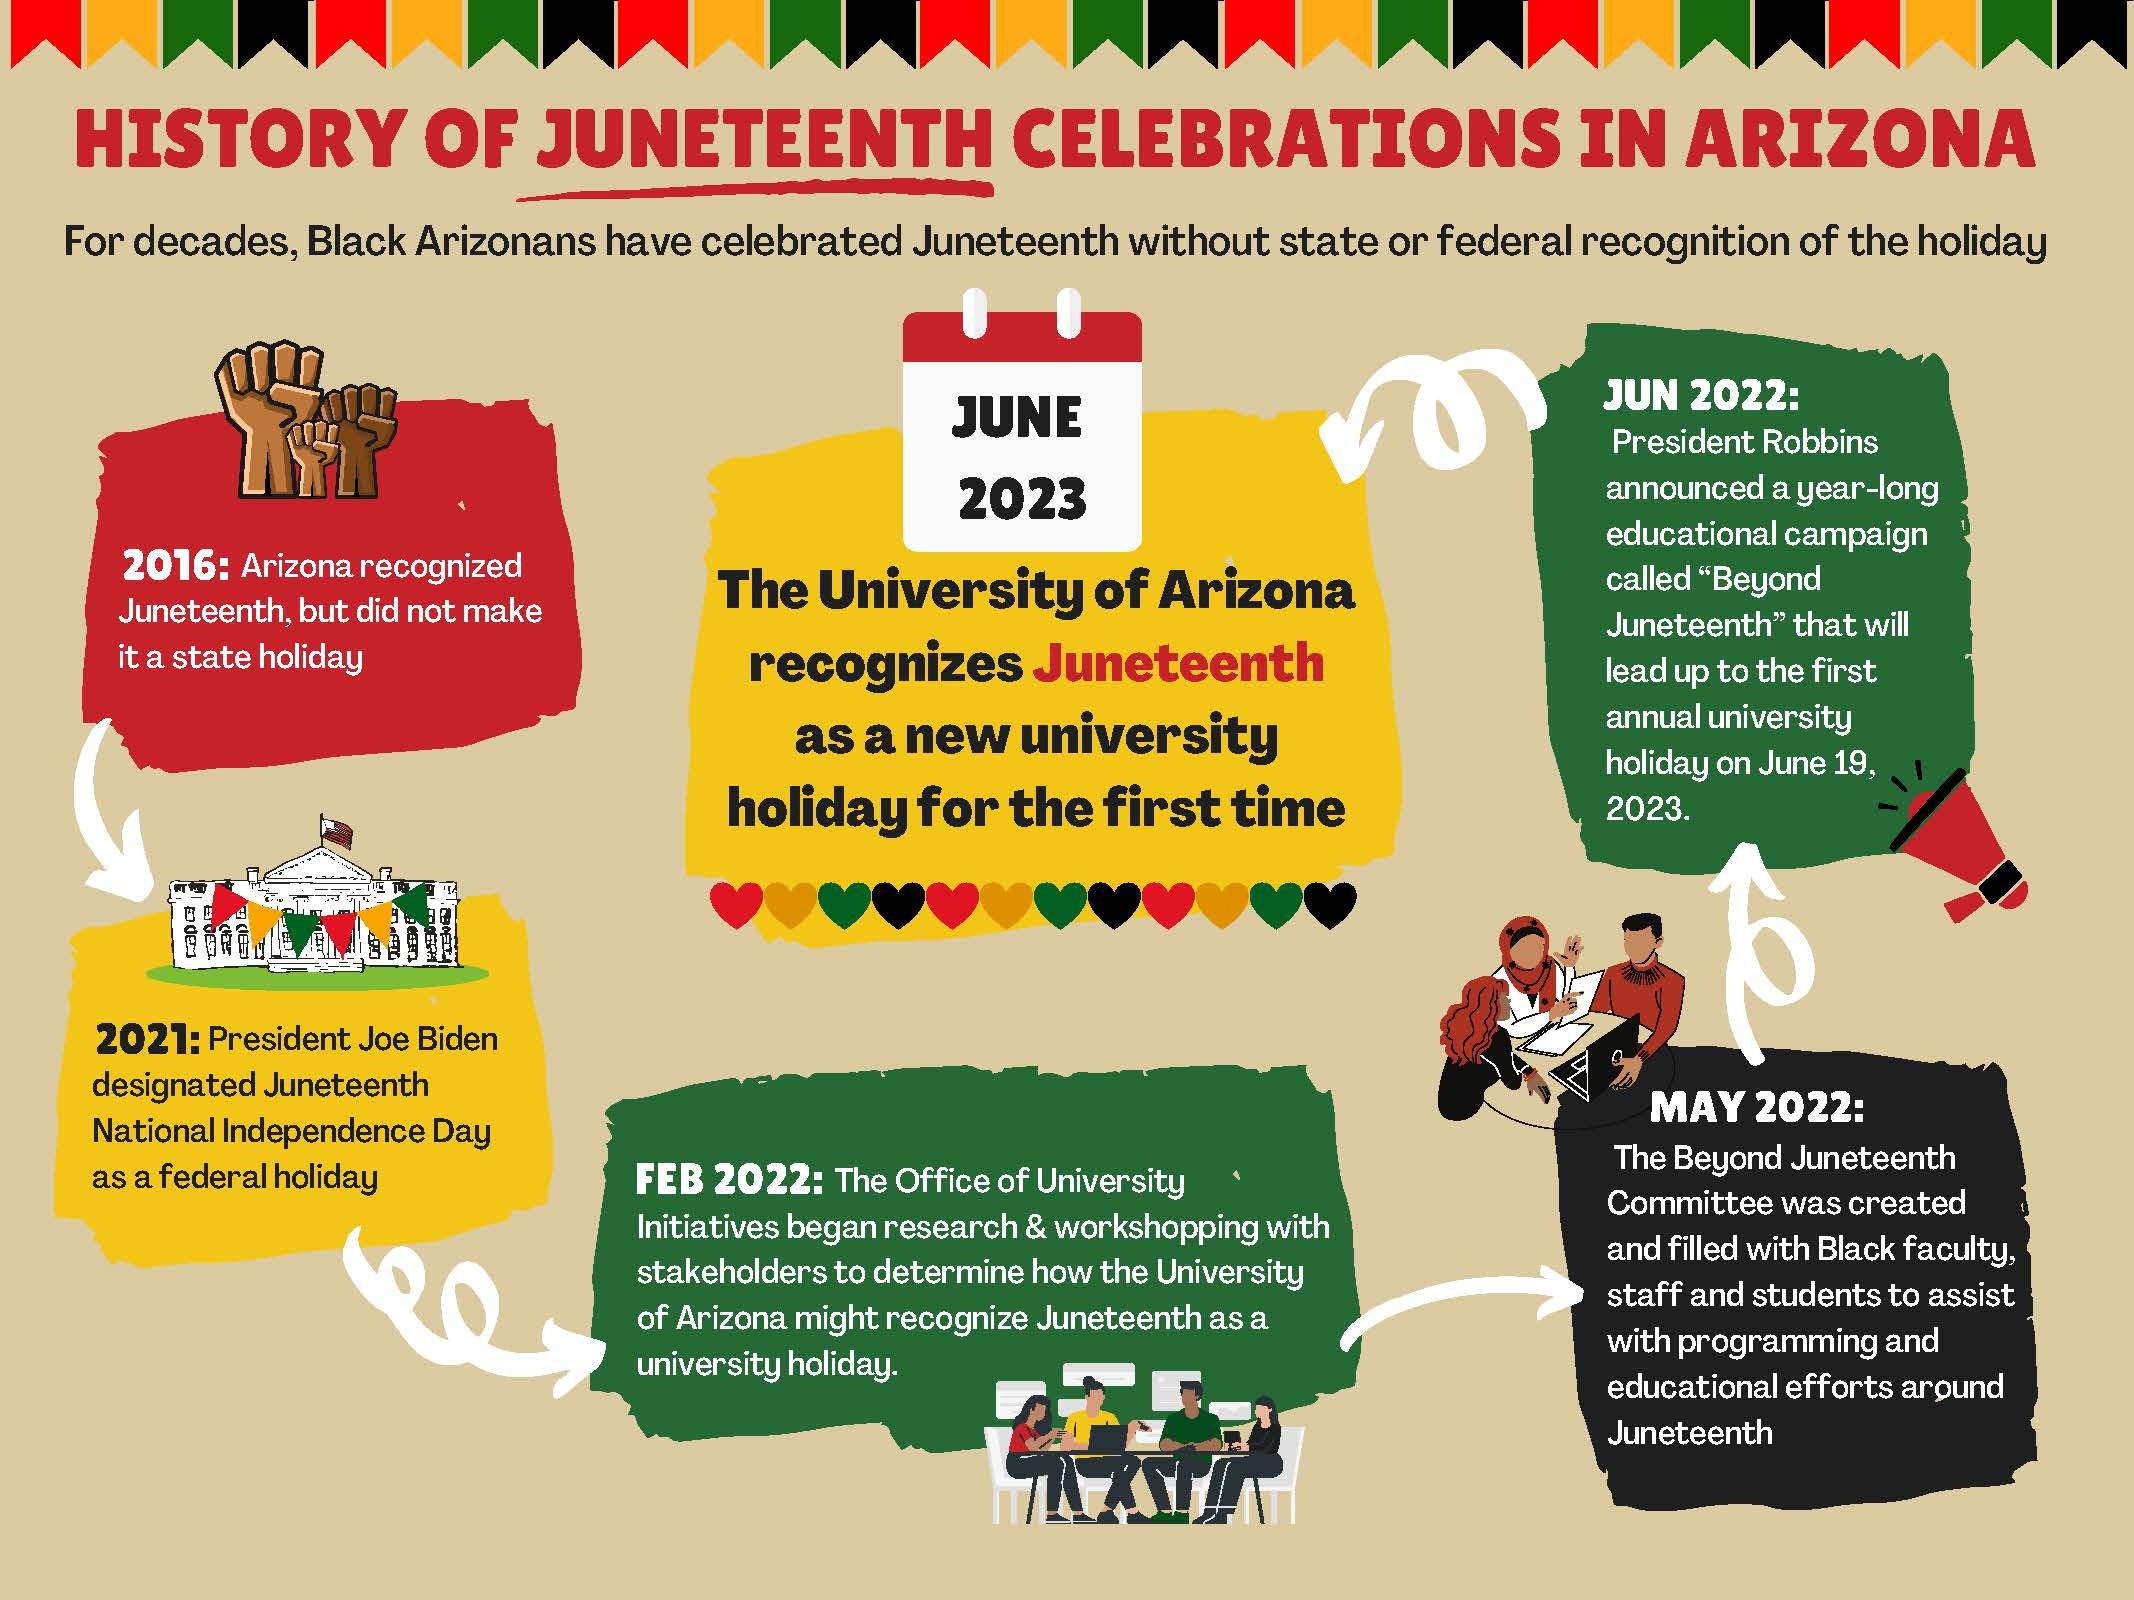 Graphic Depiction of the History of Juneteenth Celebrations in Arizona